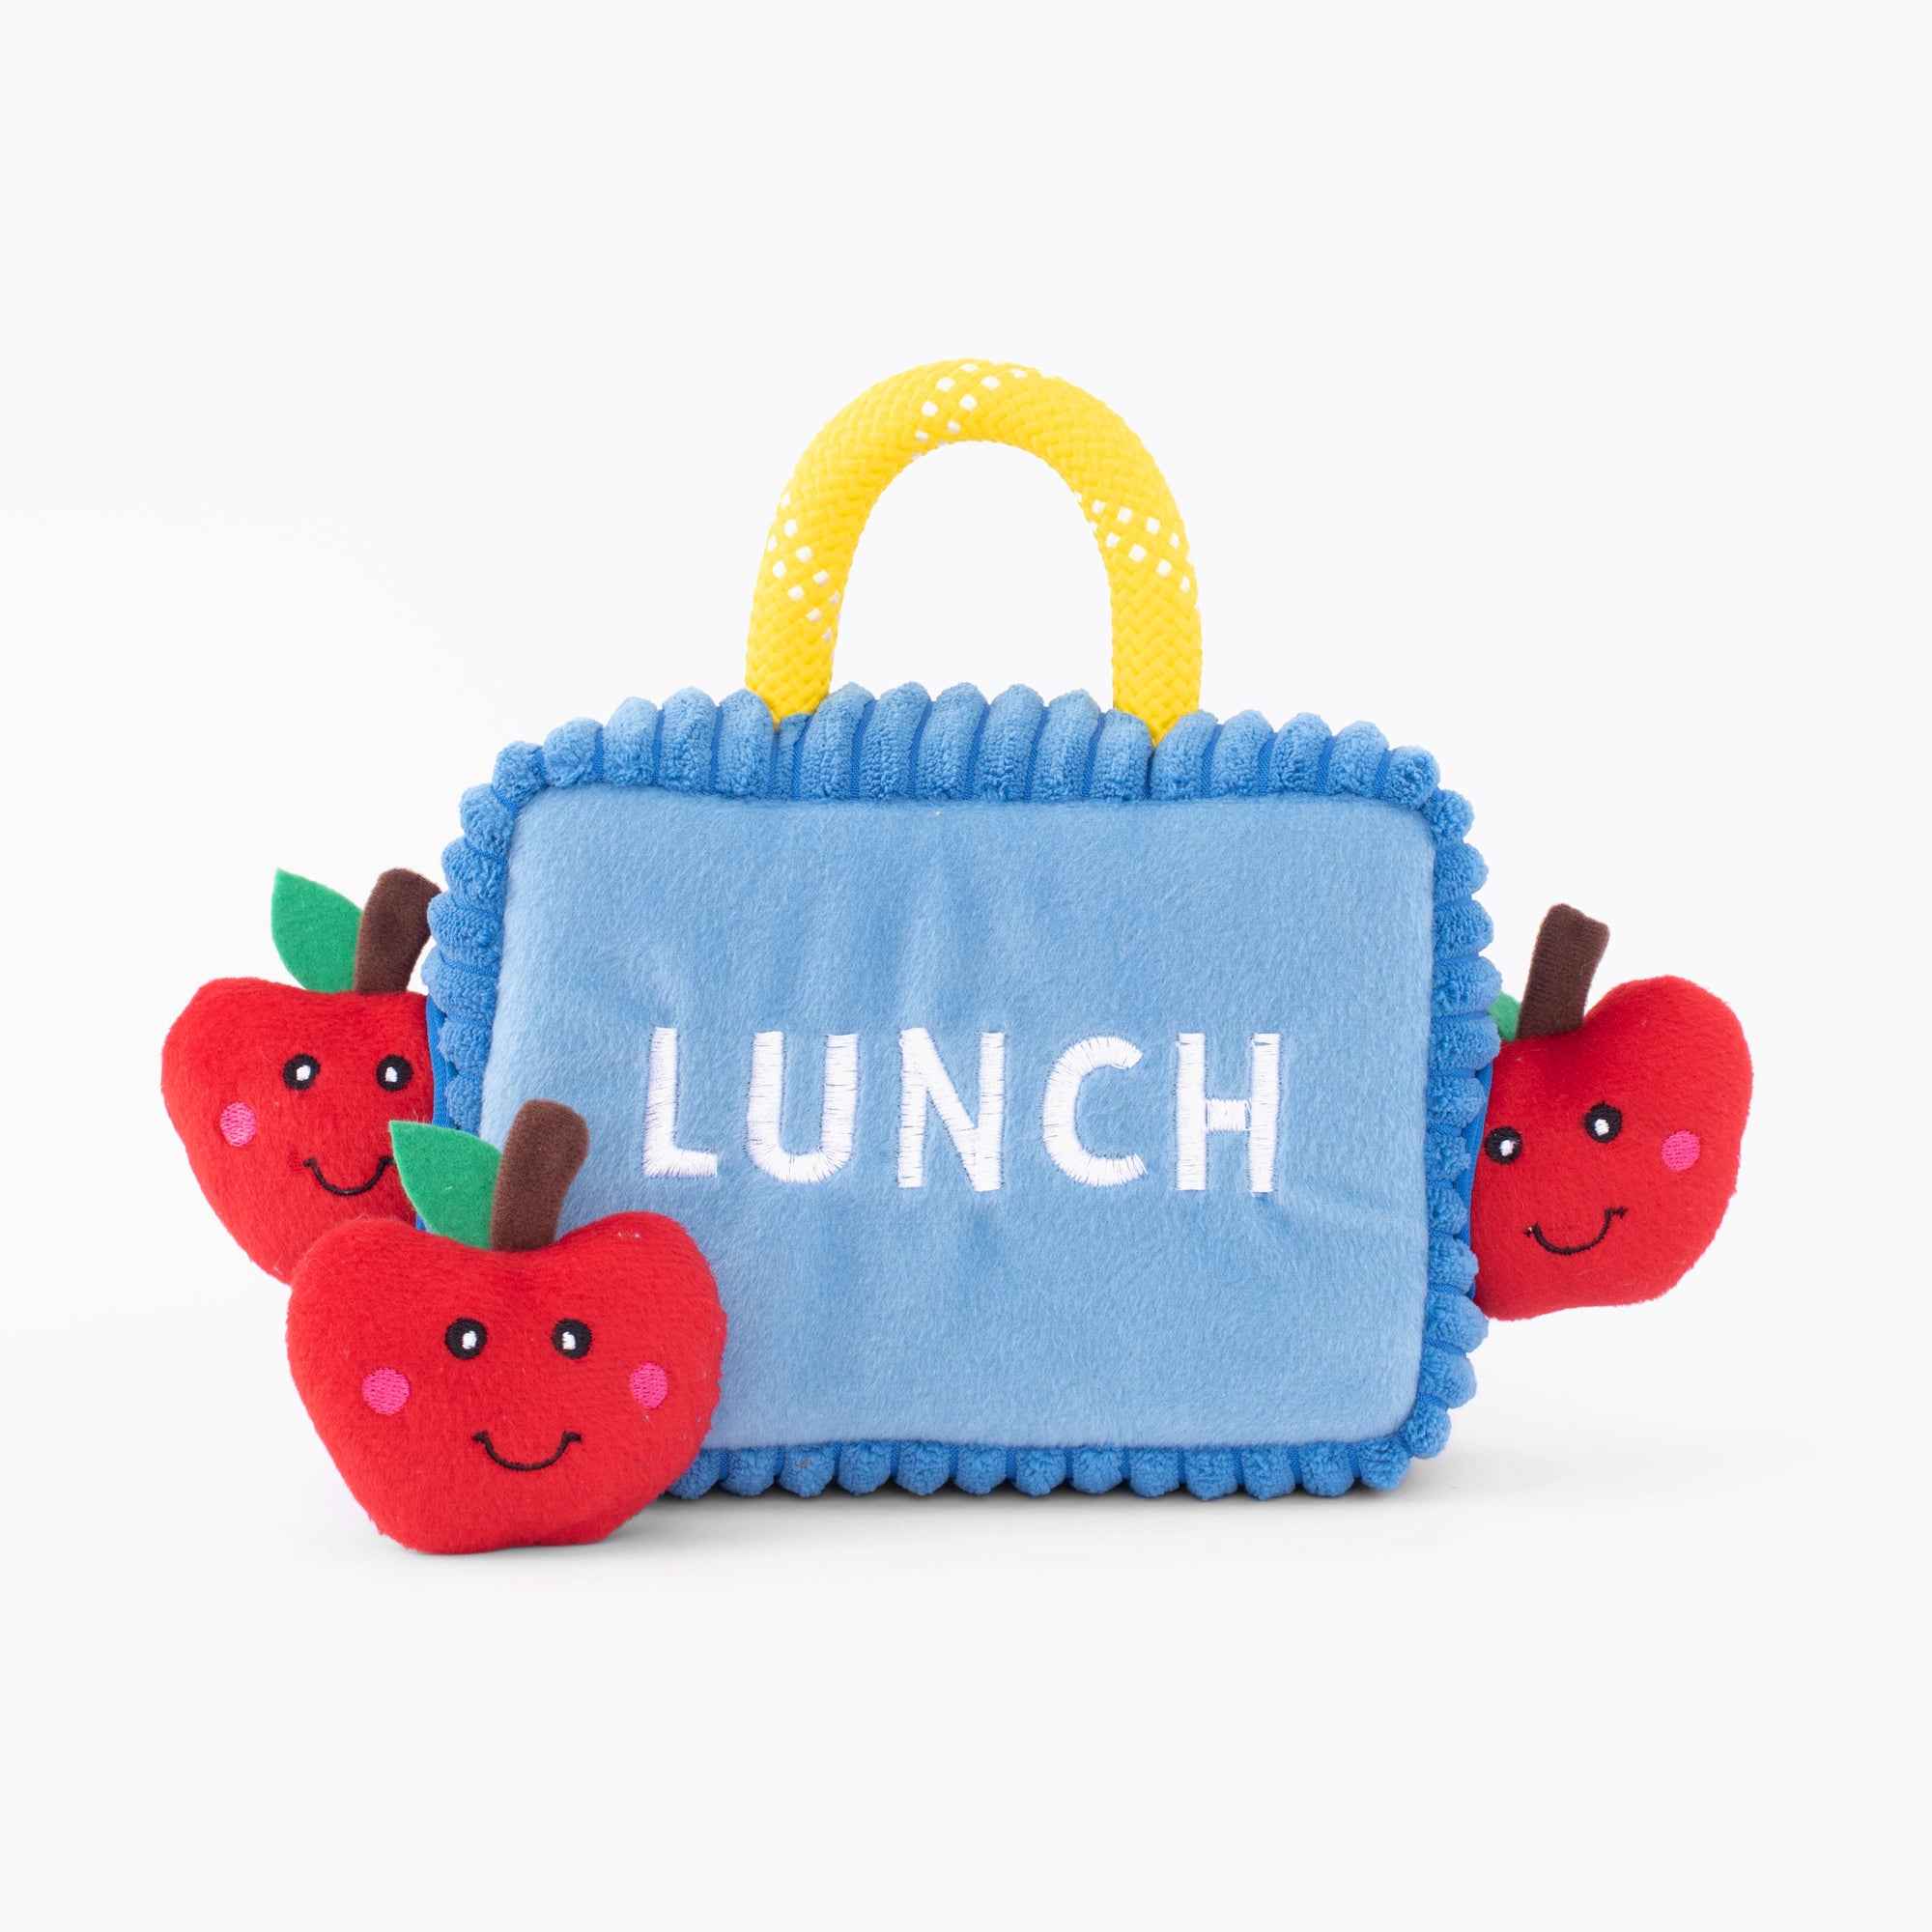 Zippy Burrow - Lunchbox with Apples